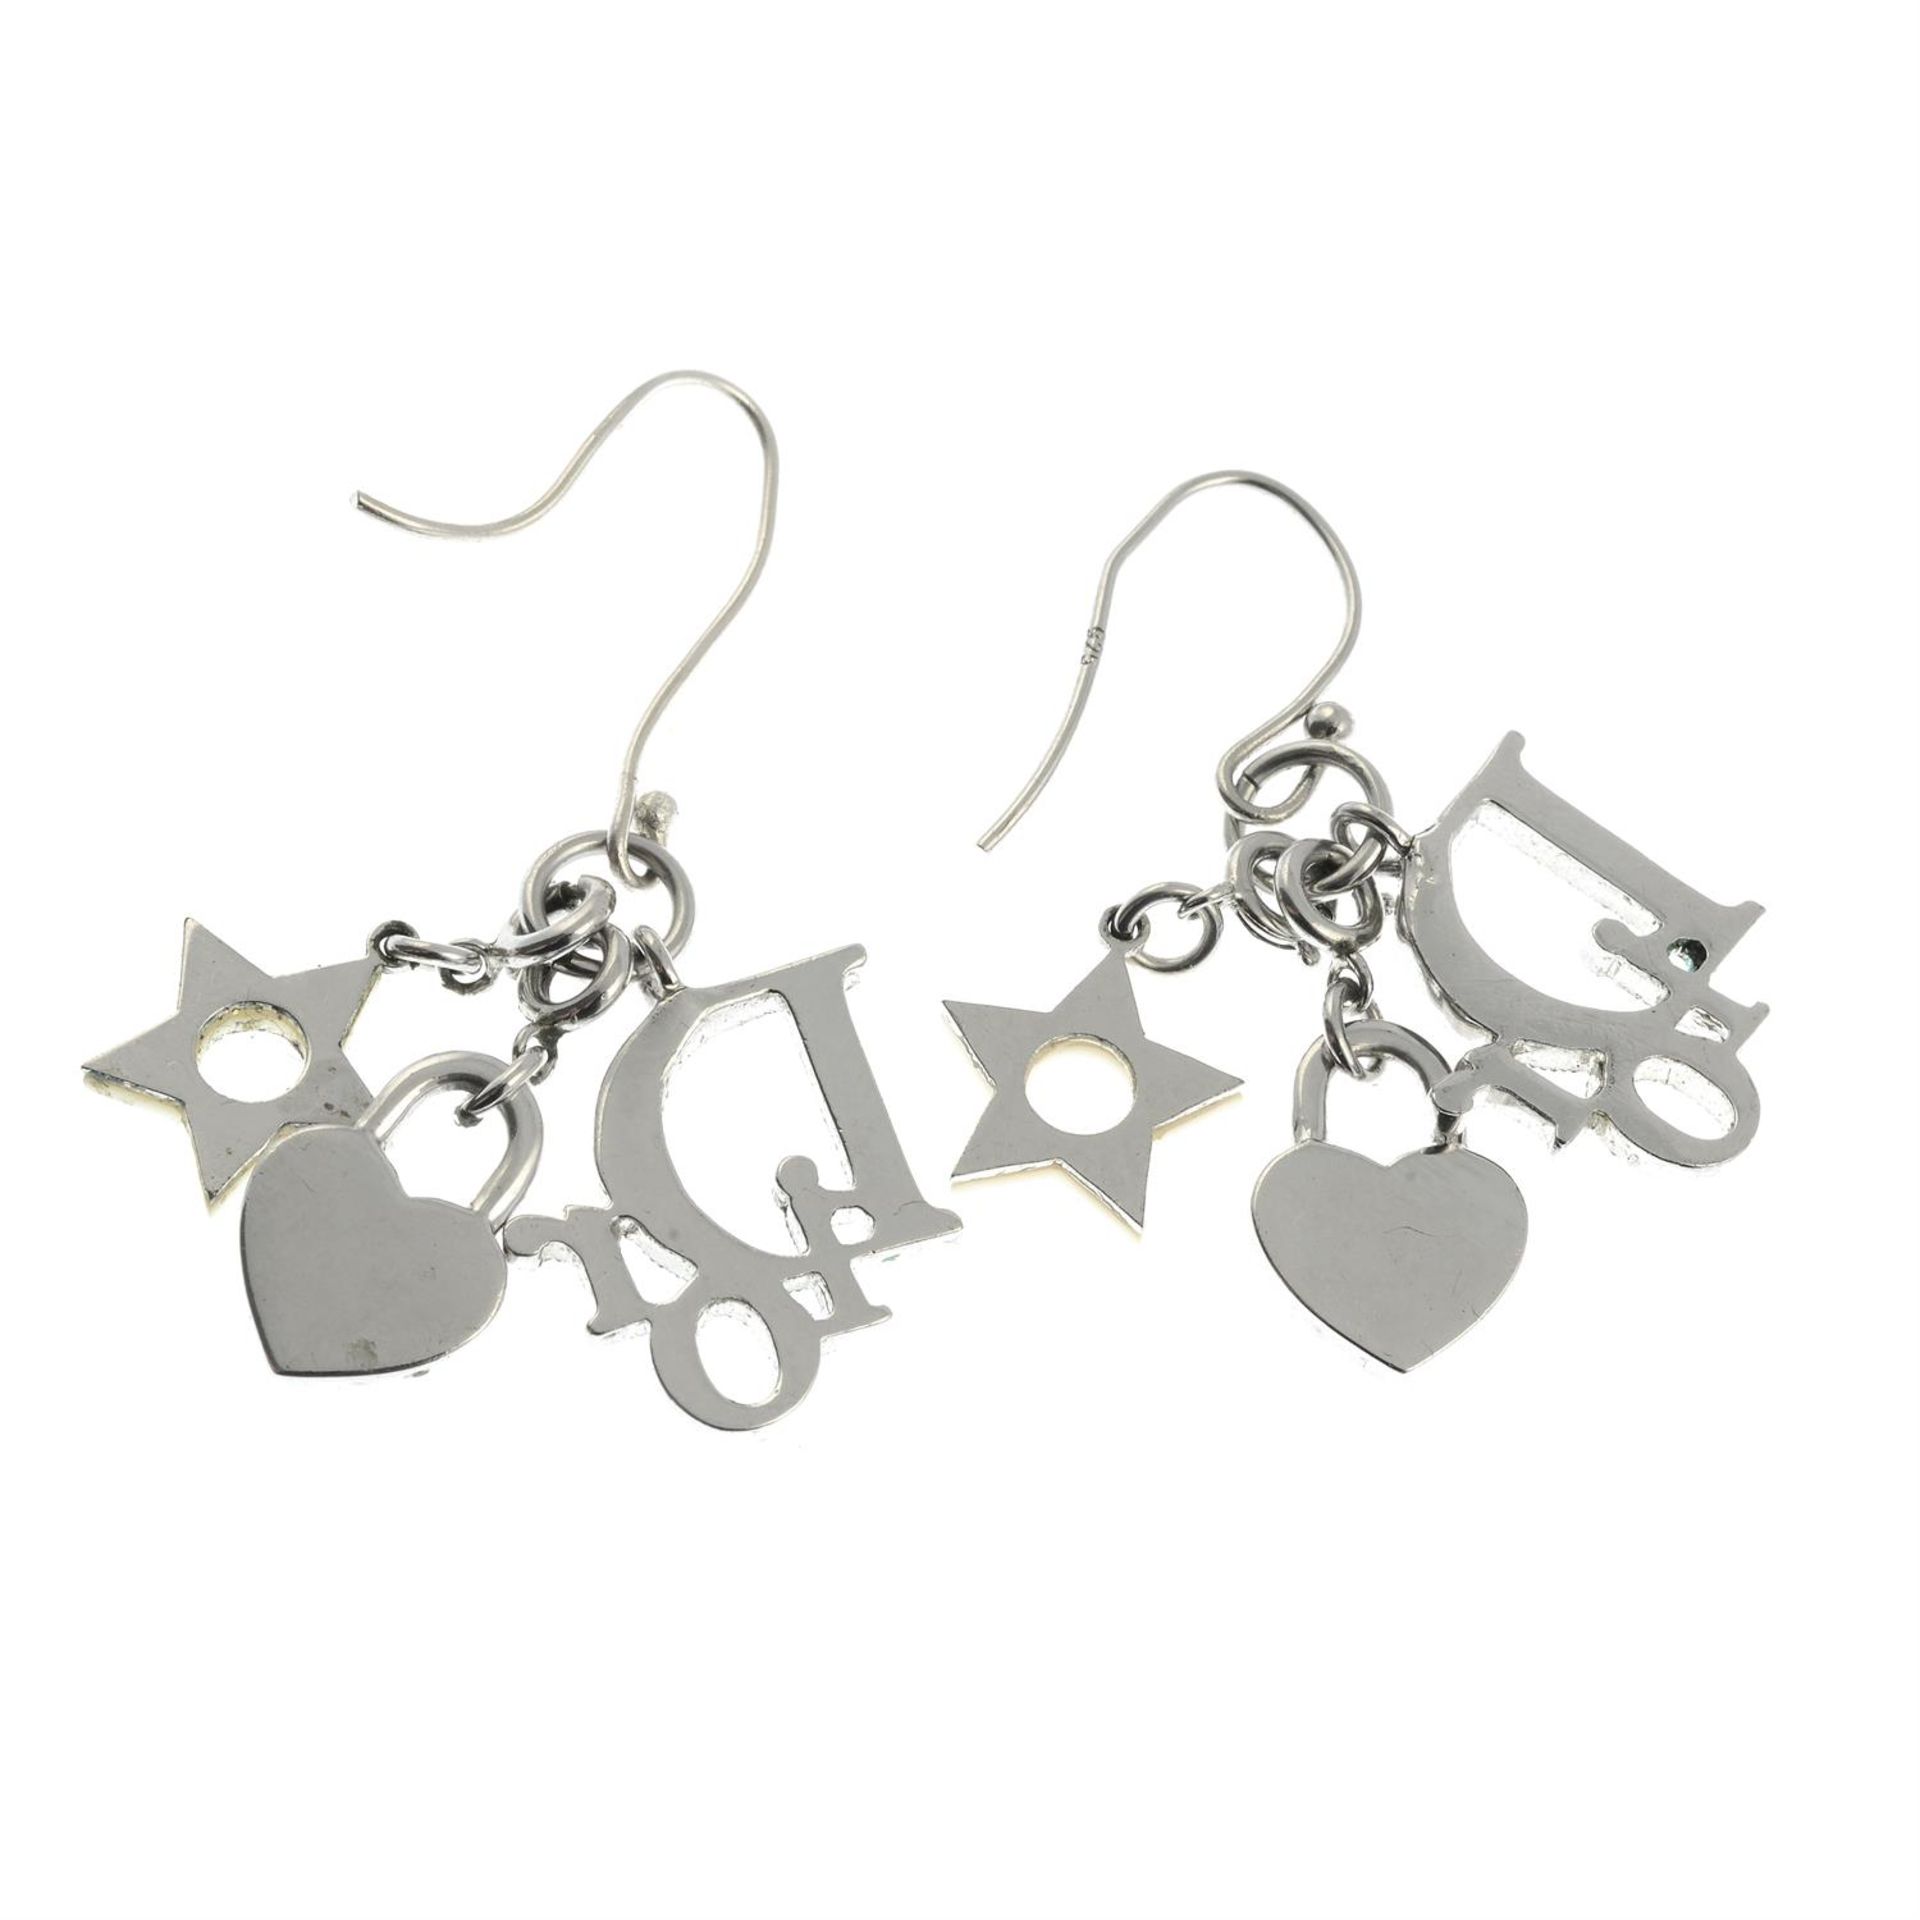 CHRISTIAN DIOR - a pair of Oblique and charm drop earrings. - Image 2 of 3